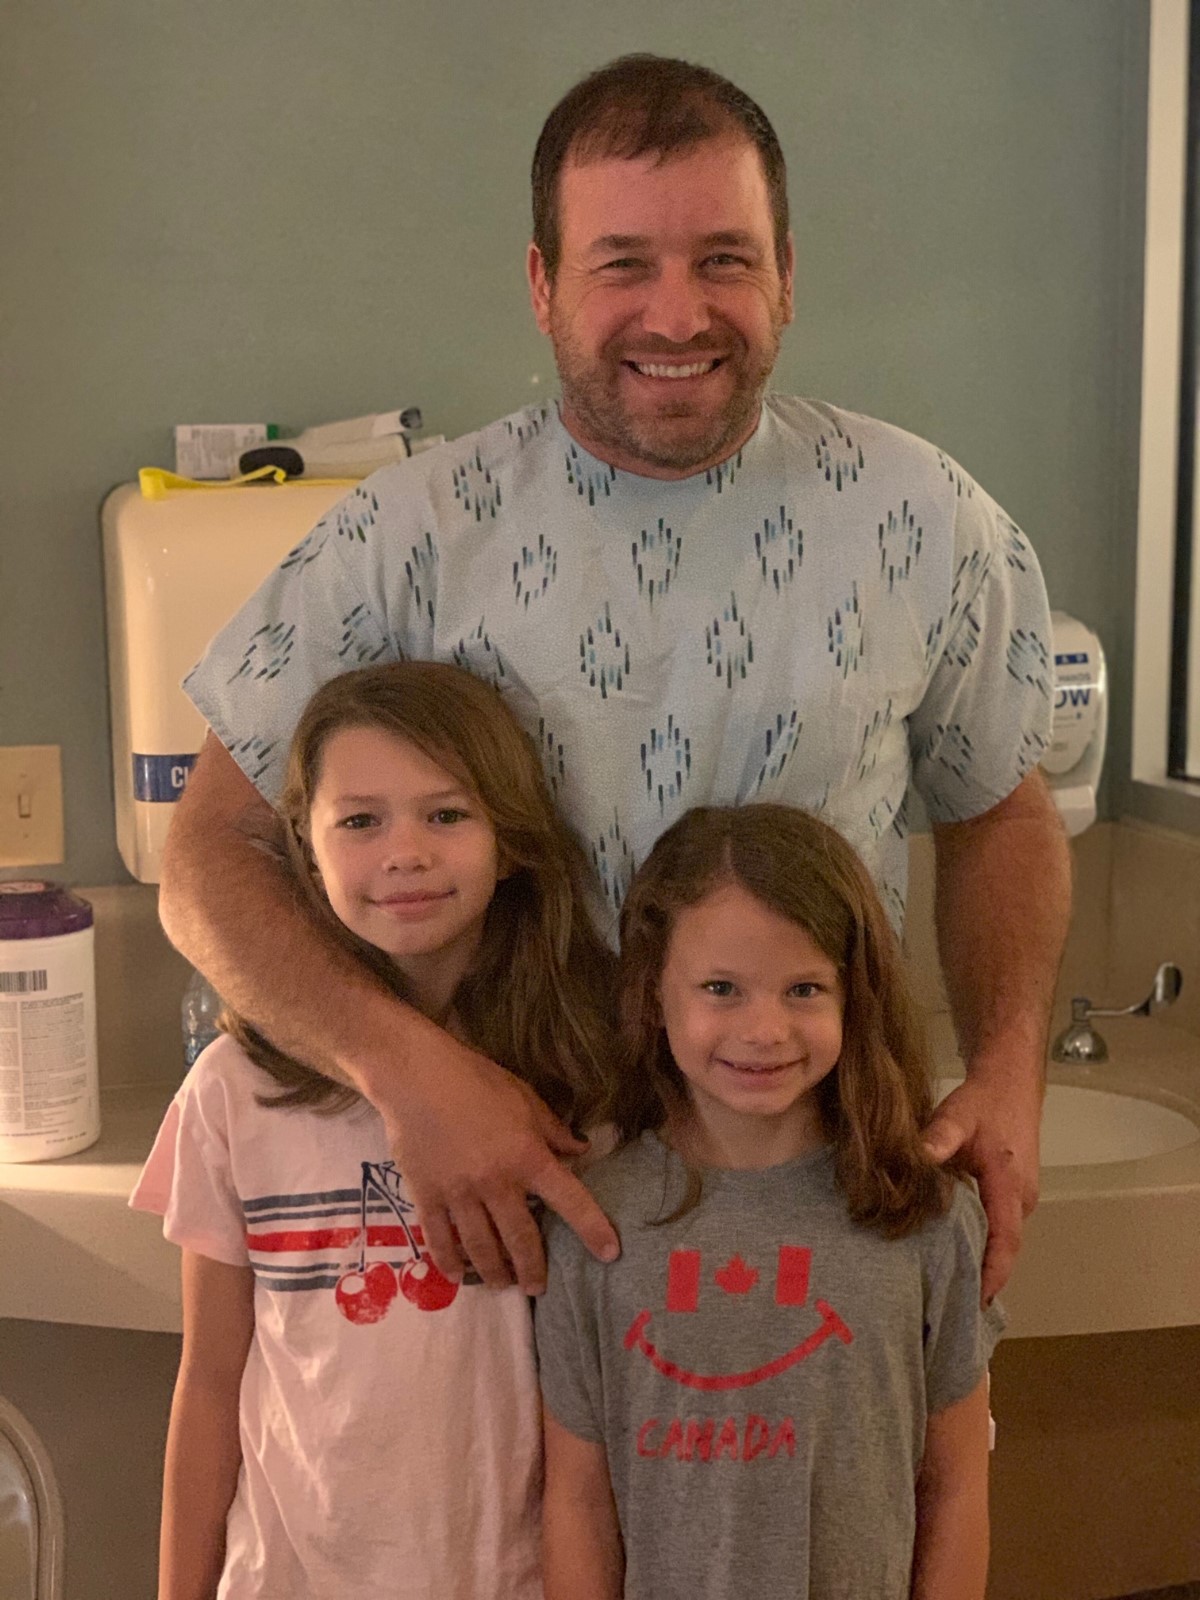 Newman with his two daughters in hospital